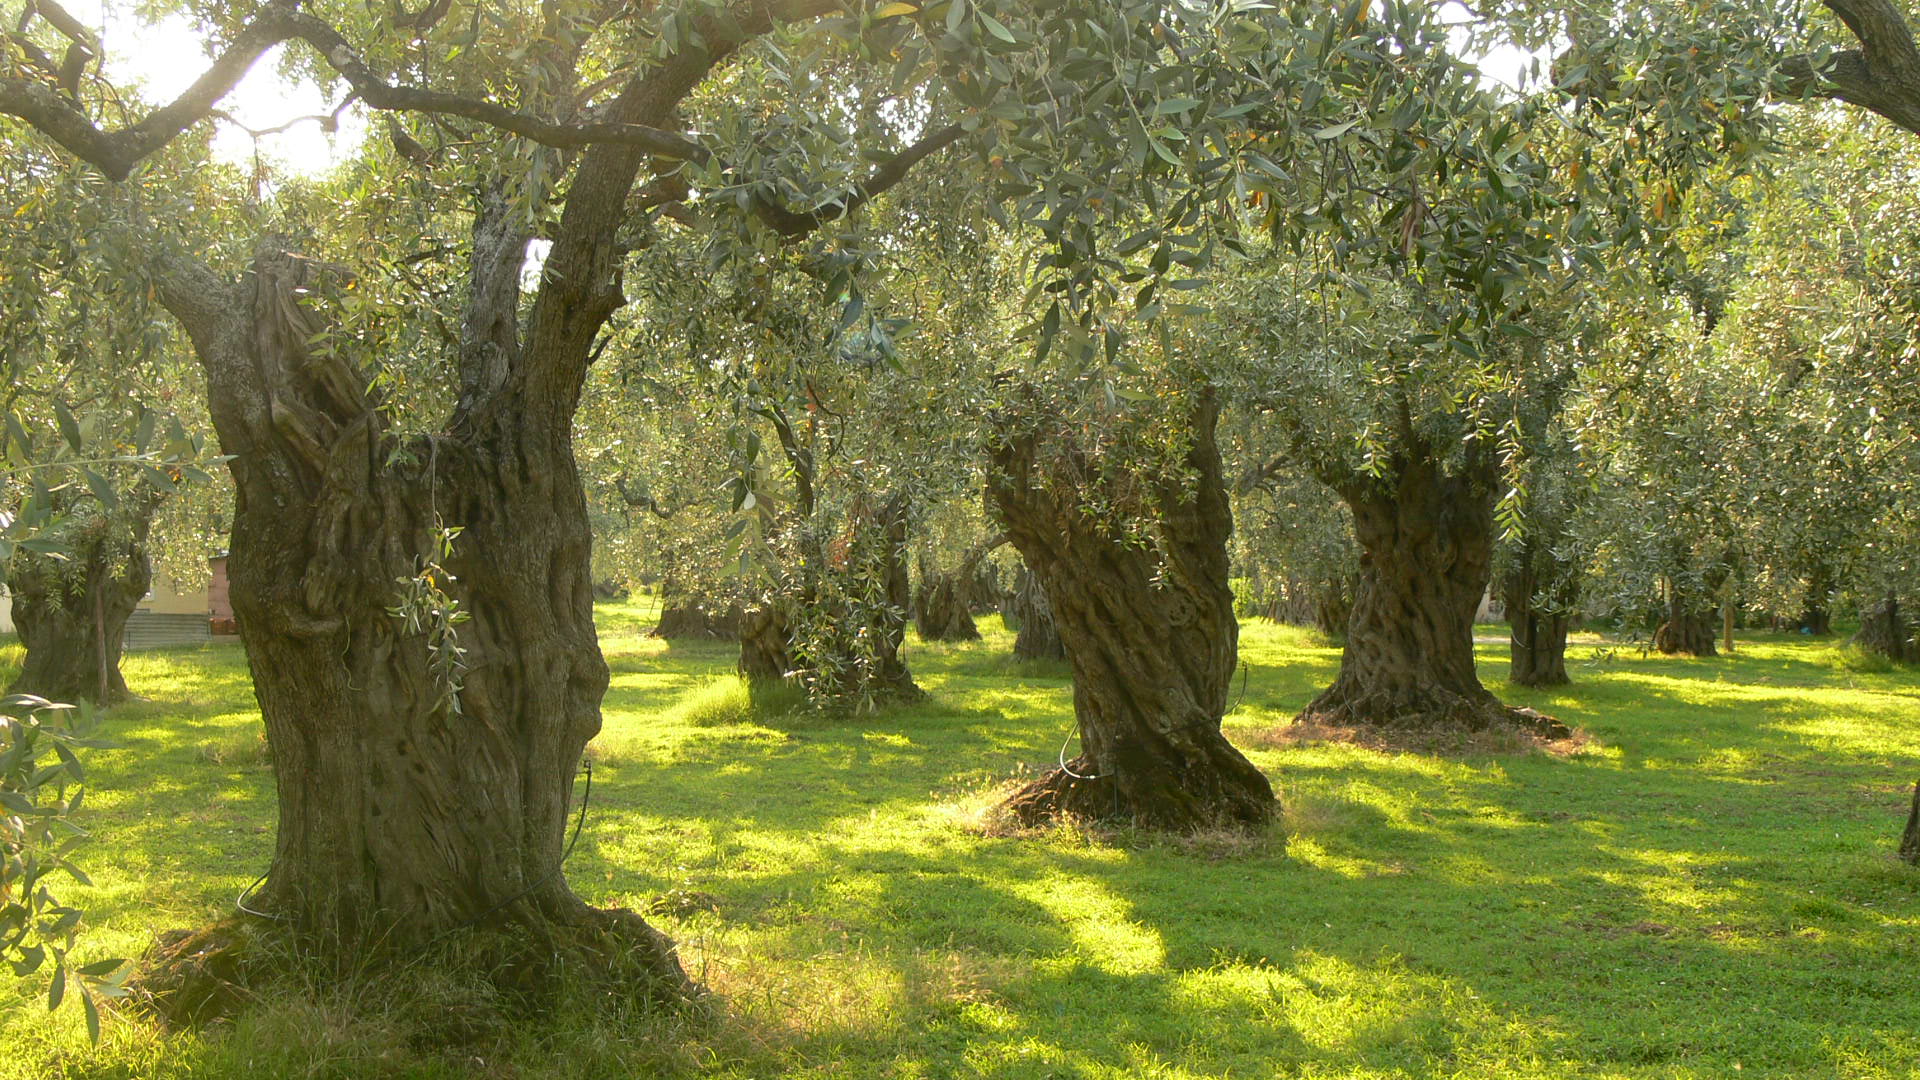 Olive cultivation could see growth in Azerbaijan